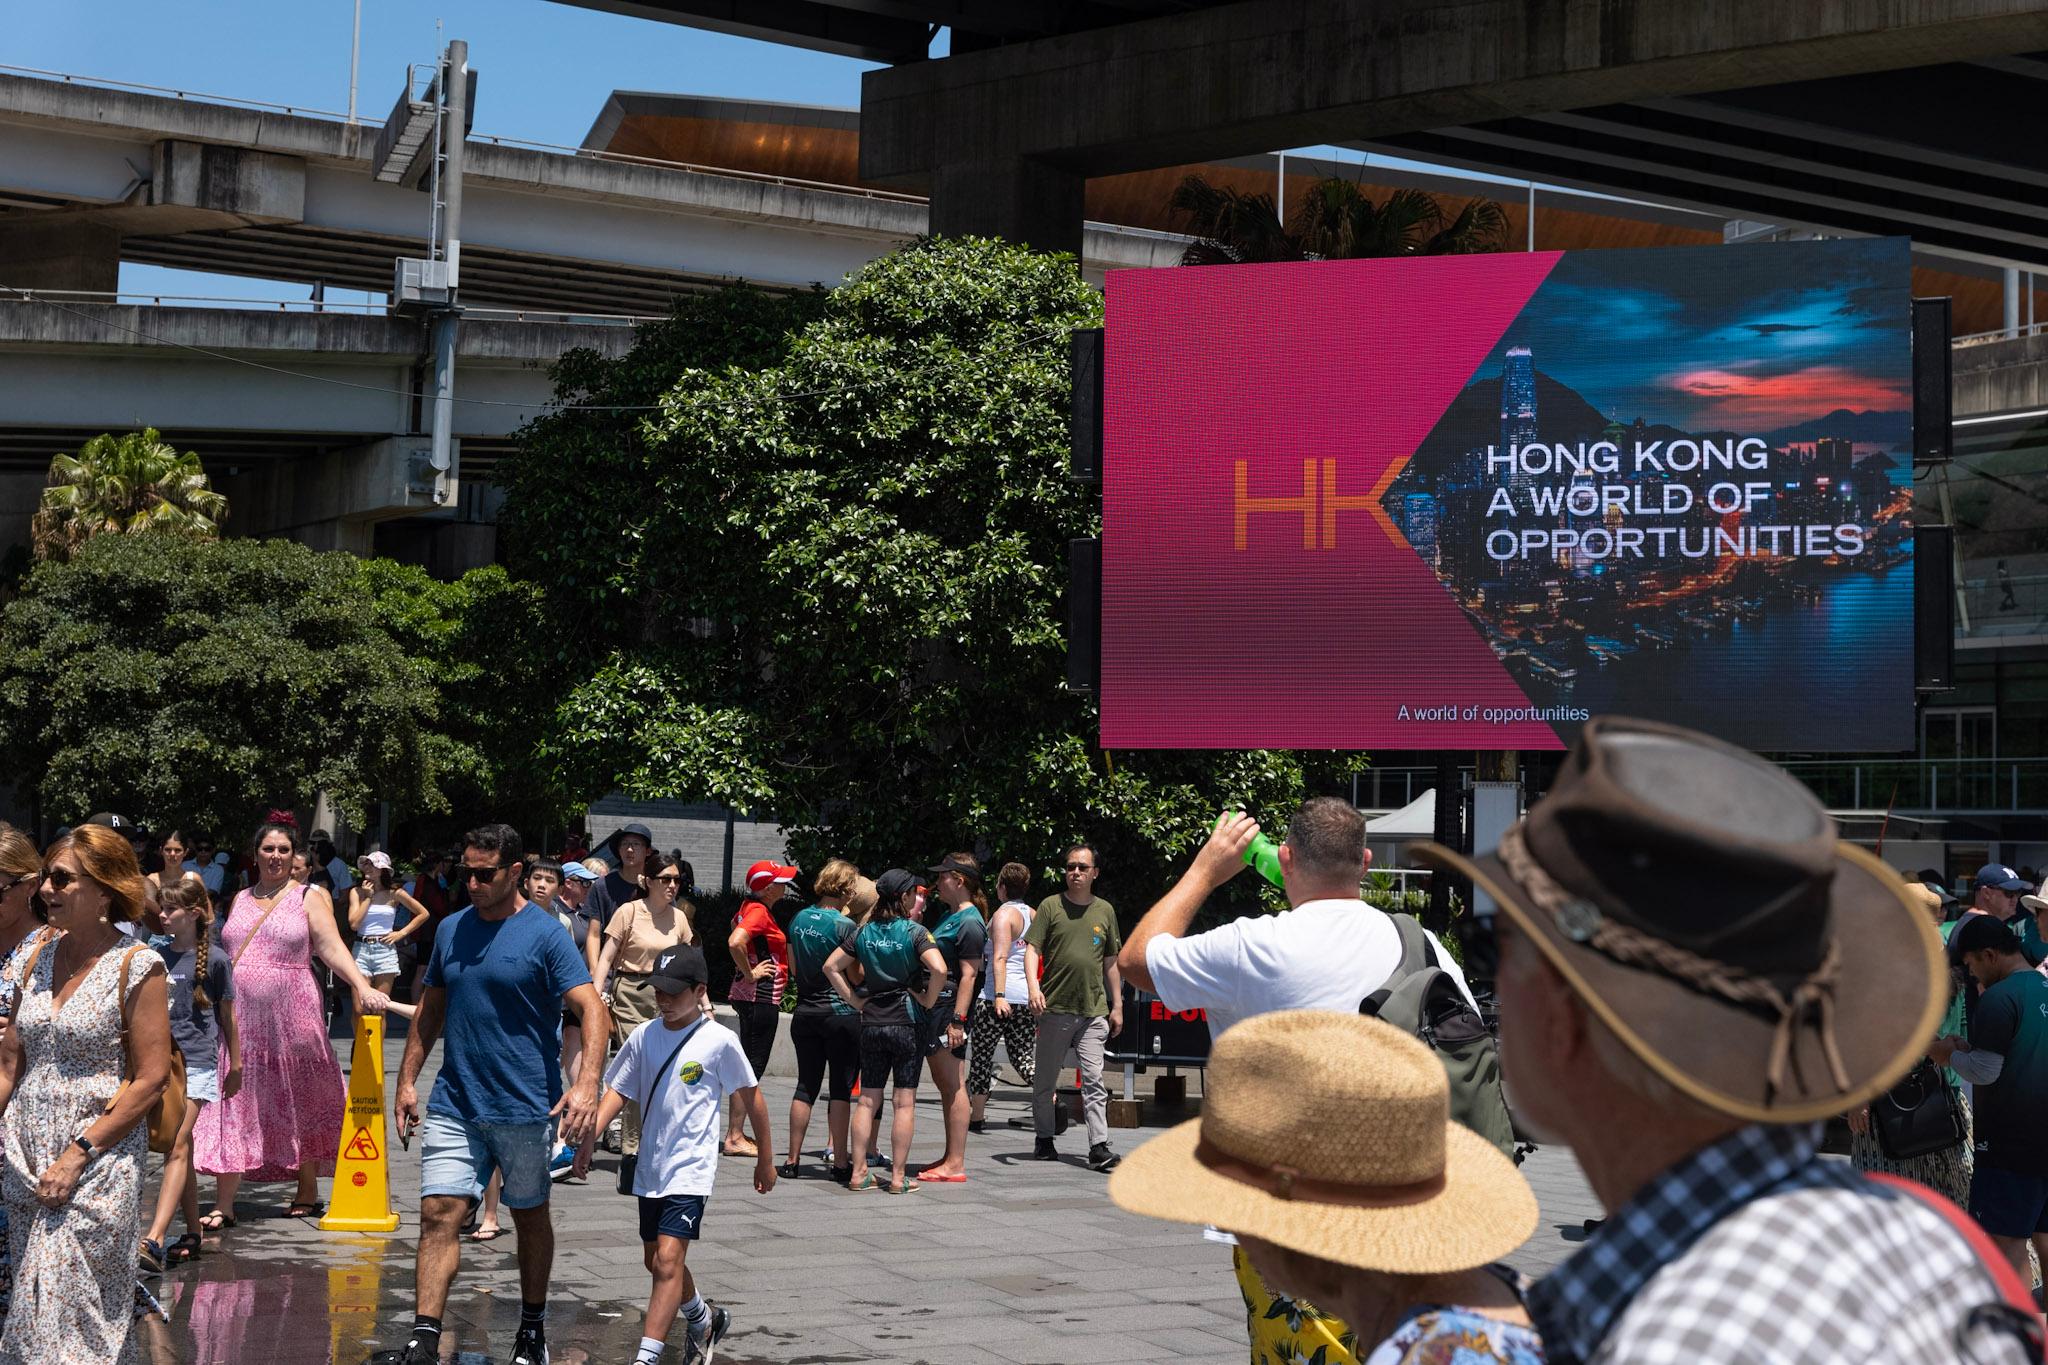 The Hong Kong Economic and Trade Office, Sydney participated in the Sydney Lunar Festival Dragon Boat Races held in Sydney, Australia, on January 28 and 29. Photo shows a Brand Hong Kong video being screened at Darling Harbour during the races to promote the latest developments and opportunities in Hong Kong.